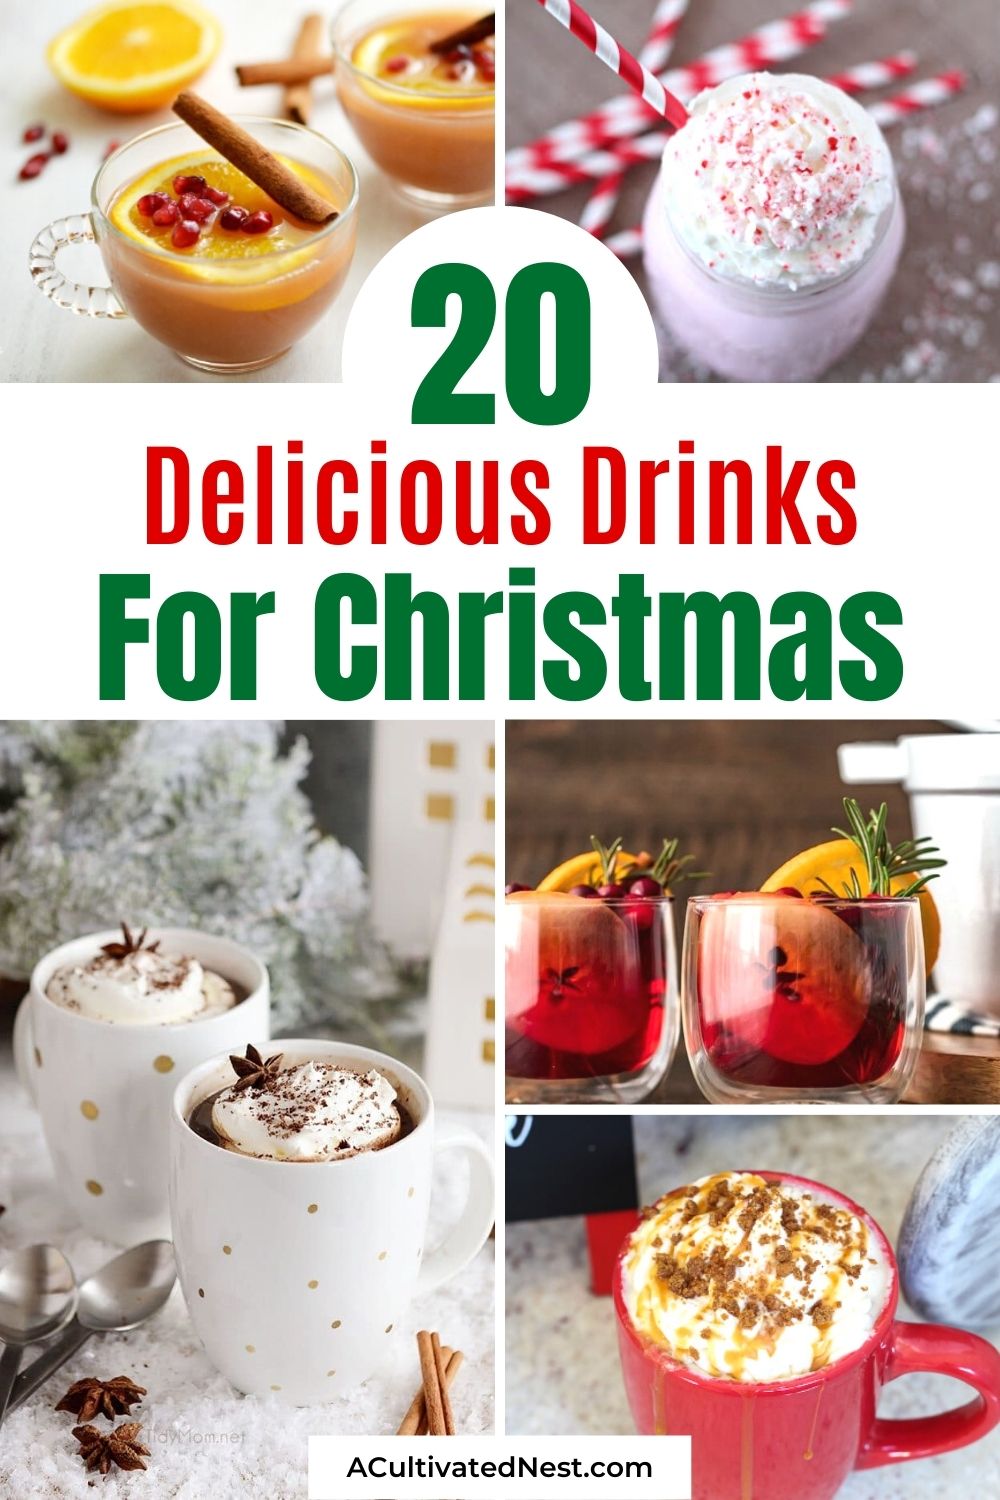 20 Christmas Drink Recipes- If you want a delicious finishing touch for your Christmas dinner, then you need to follow some of these delicious Christmas drink recipes! | holiday drink ideas, #drinkRecipes #ChristmasDrinks #holidayDrinks #drinks #ACultivatedNest